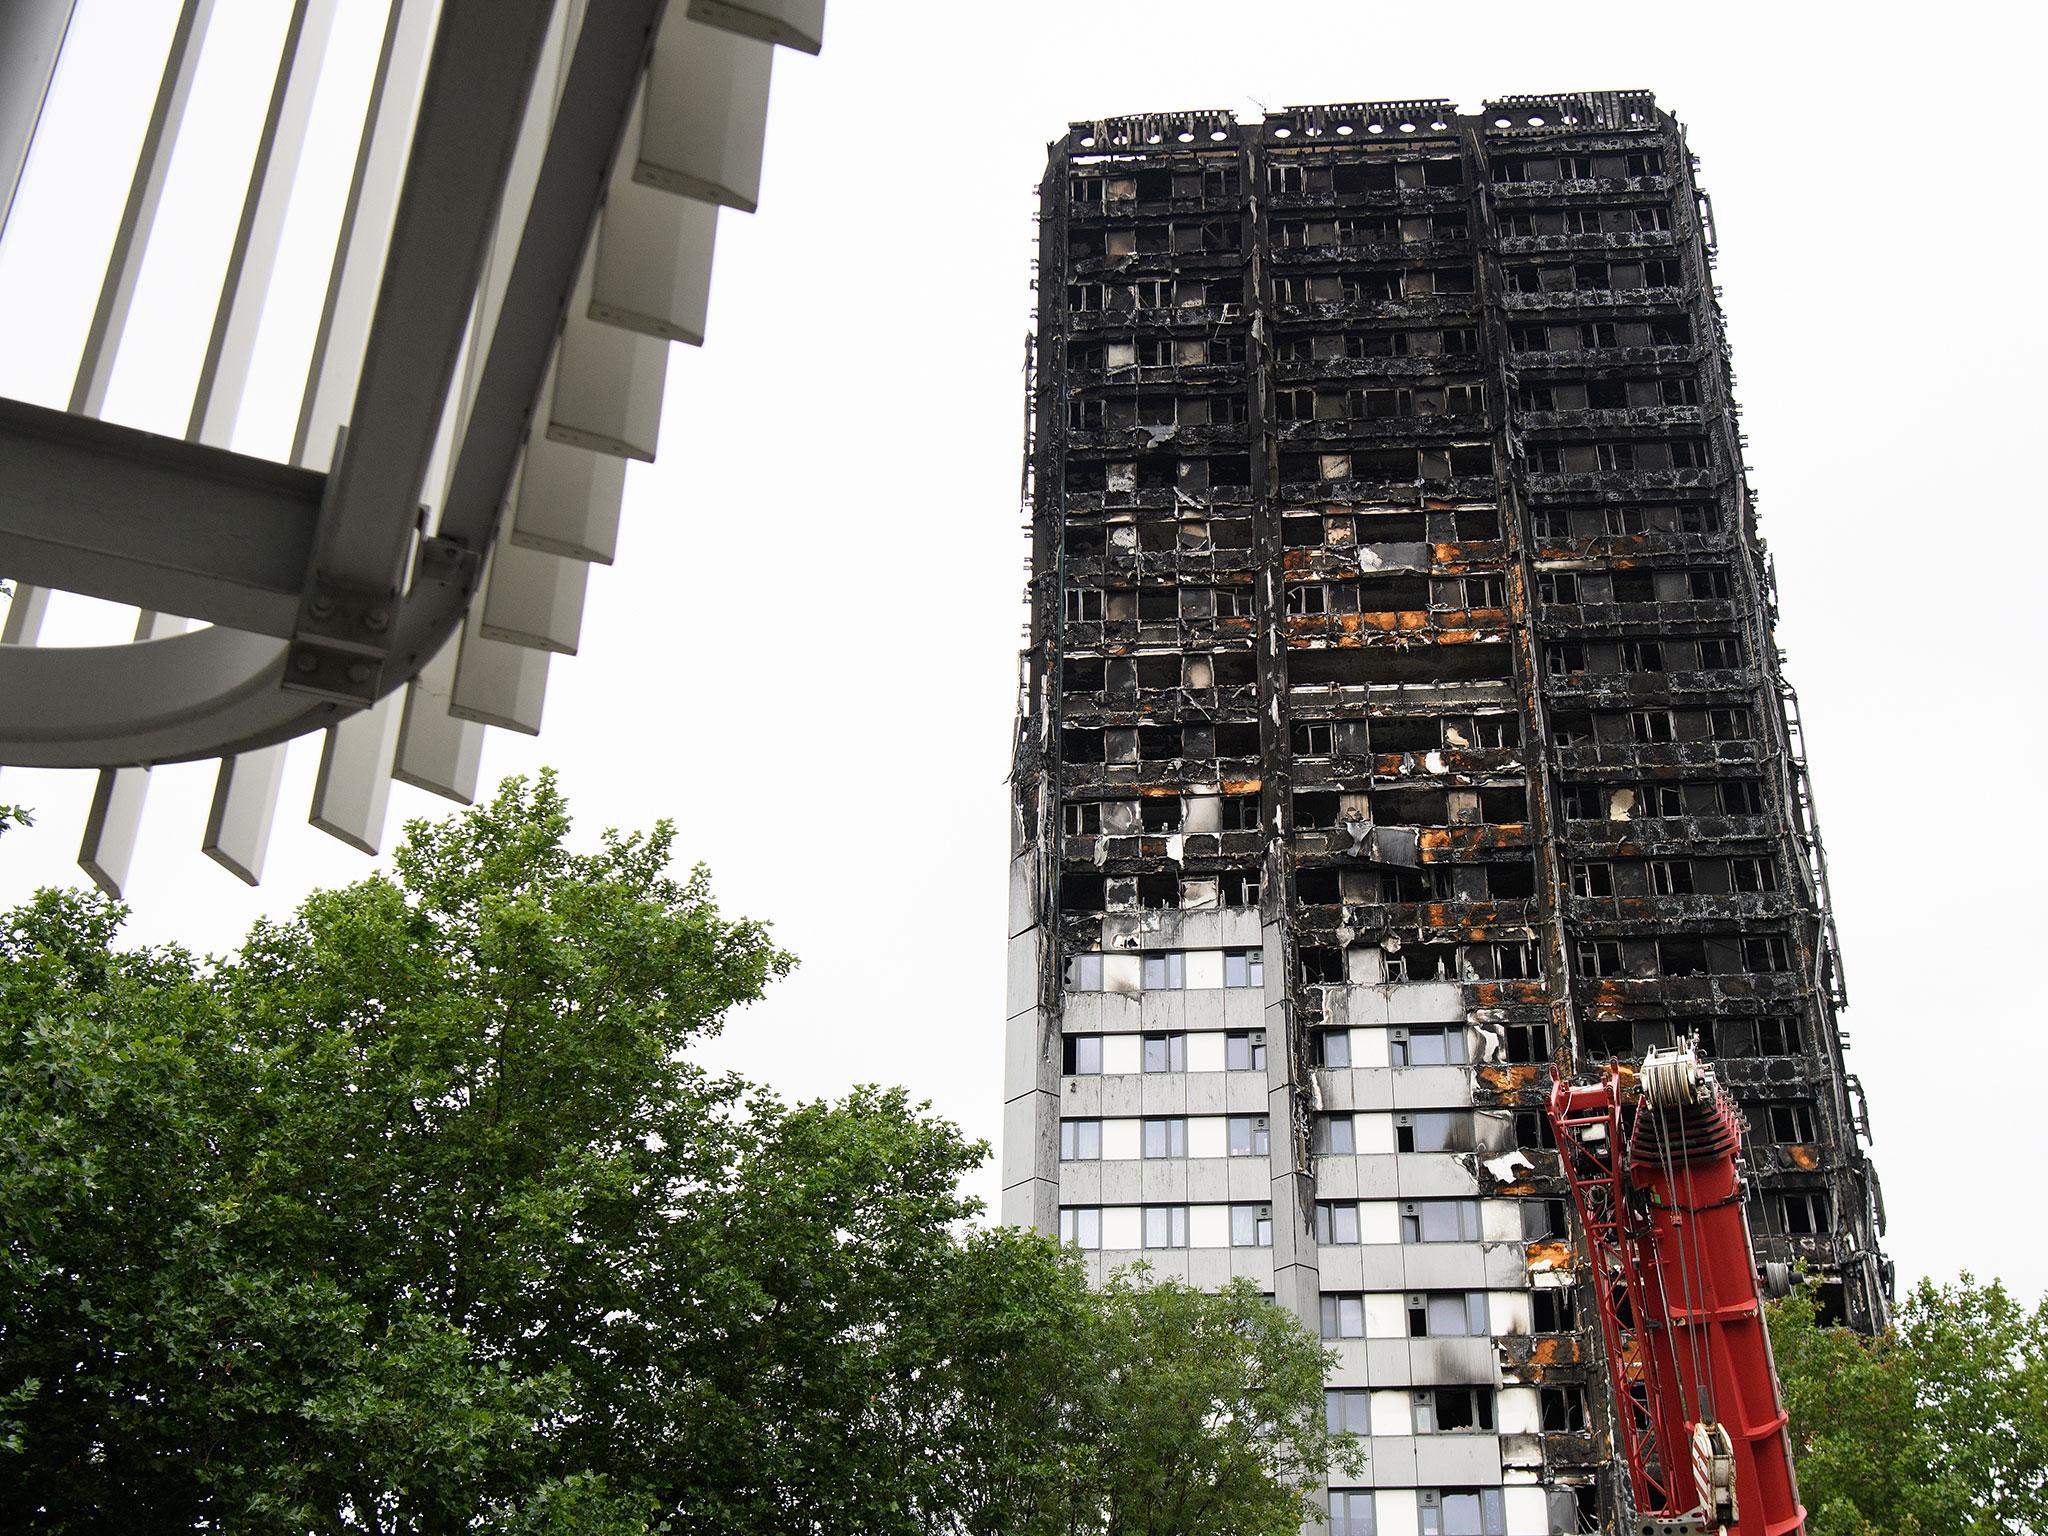 Arconic stopped international sales of Reynobond PE cladding, which was used in Grenfell, for tall buildings, citing concerns about inconsistent global building codes